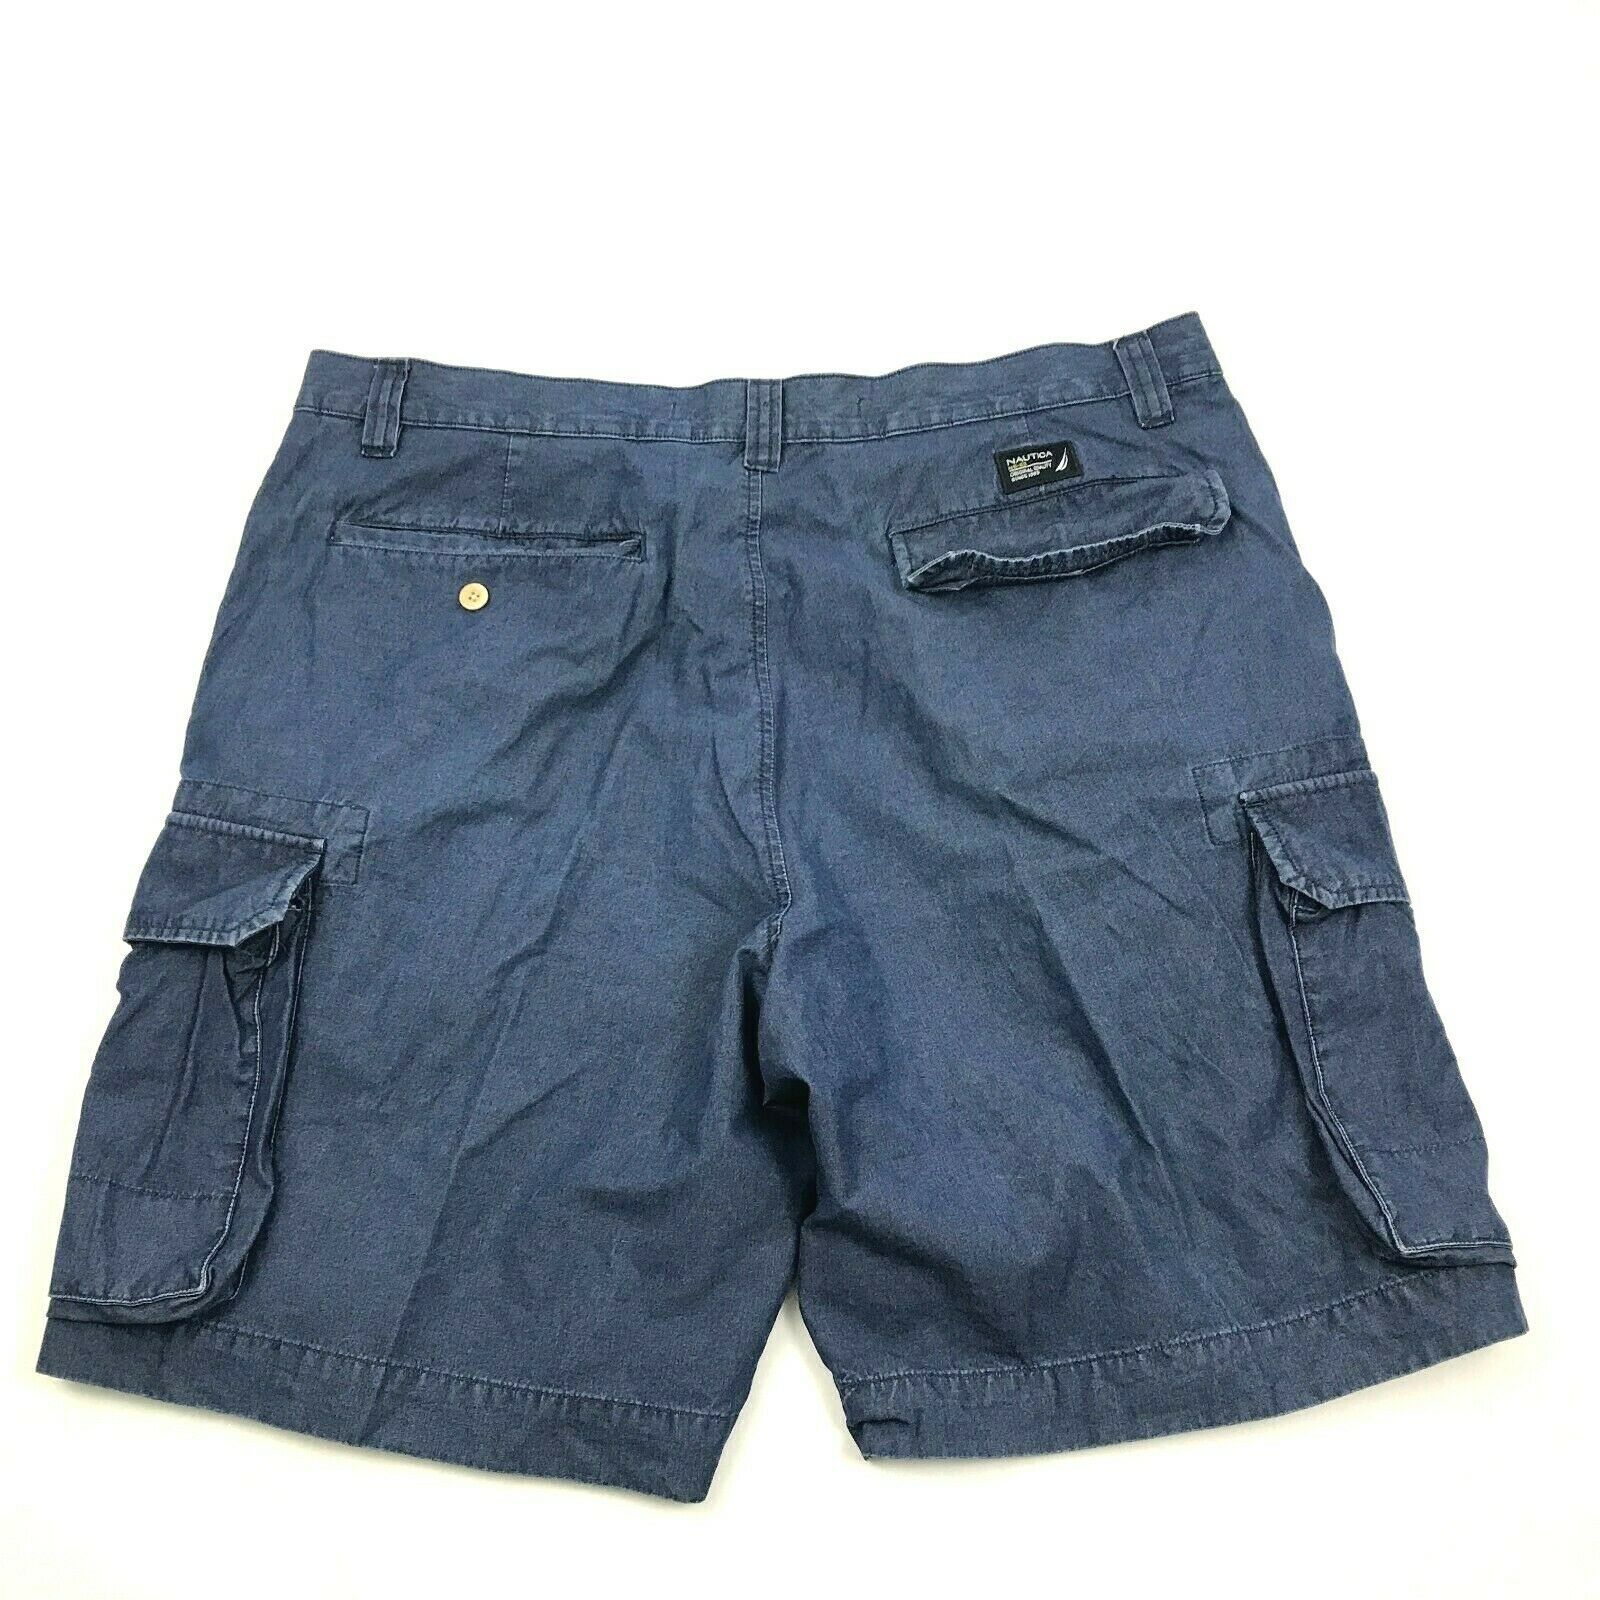 NAUTICA Clipper Cargo Shorts Relax Fit Men's Size 38 Waist Blue Boating ...